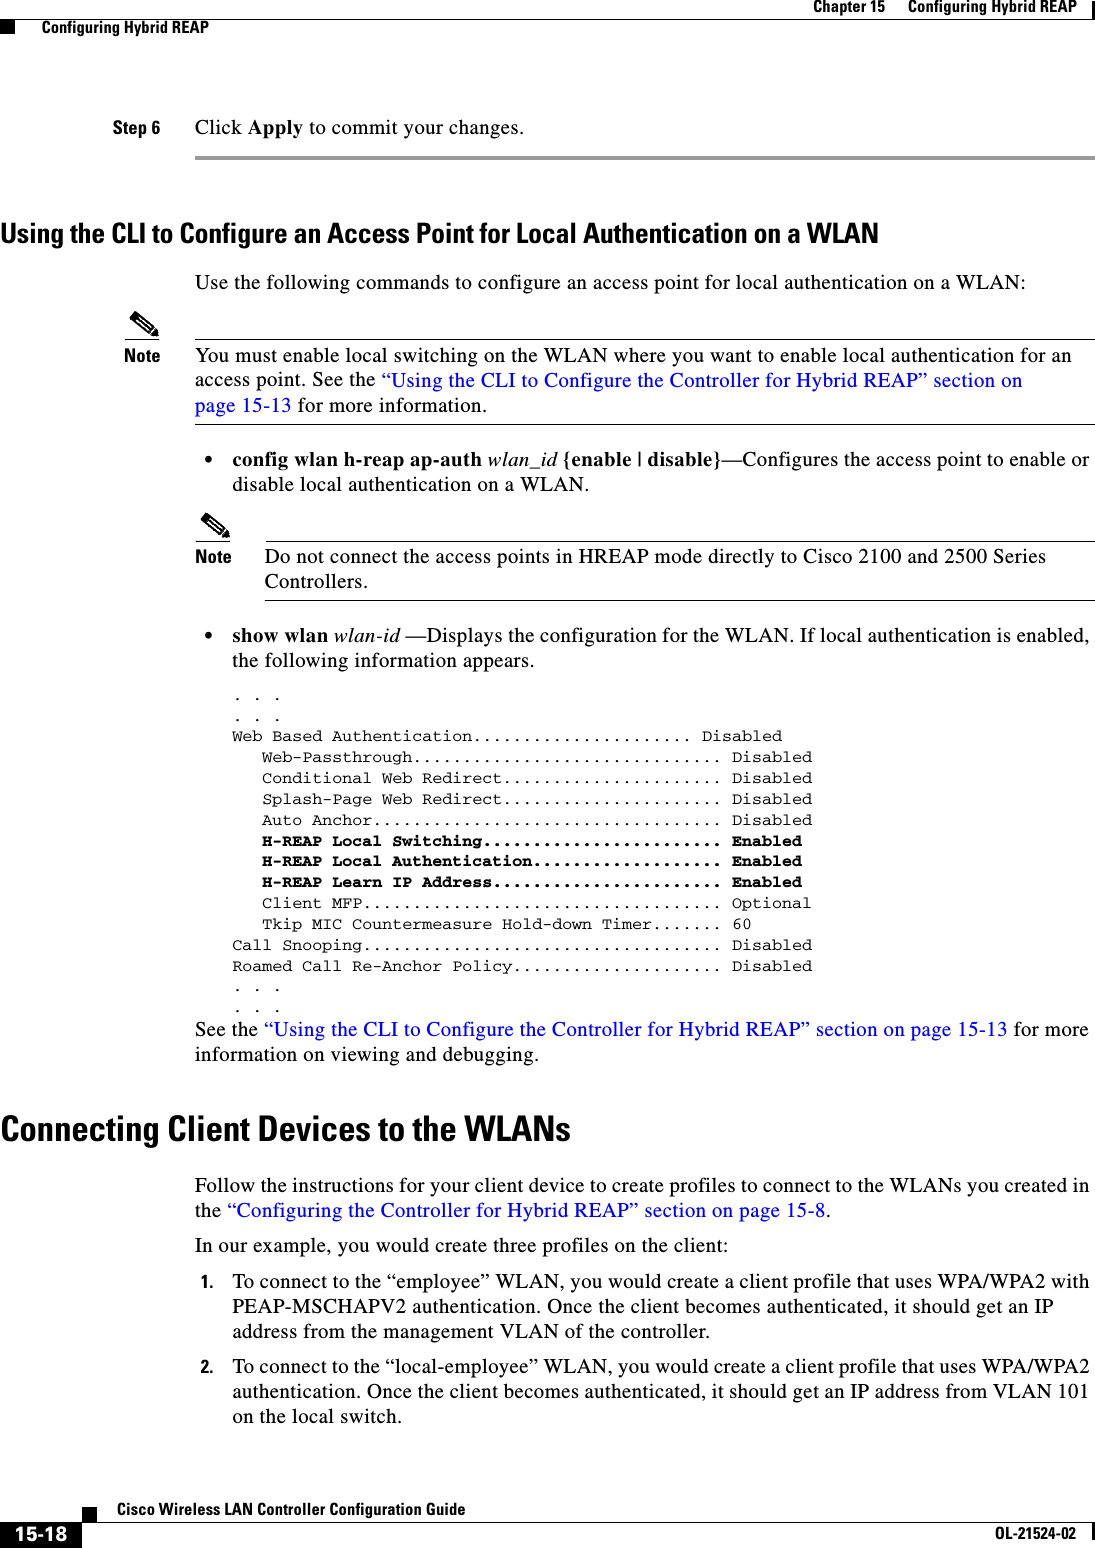  15-18Cisco Wireless LAN Controller Configuration GuideOL-21524-02Chapter 15      Configuring Hybrid REAP  Configuring Hybrid REAPStep 6 Click Apply to commit your changes. Using the CLI to Configure an Access Point for Local Authentication on a WLANUse the following commands to configure an access point for local authentication on a WLAN: Note You must enable local switching on the WLAN where you want to enable local authentication for an access point. See the “Using the CLI to Configure the Controller for Hybrid REAP” section on page 15-13 for more information.  • config wlan h-reap ap-auth wlan_id {enable | disable}—Configures the access point to enable or disable local authentication on a WLAN.Note Do not connect the access points in HREAP mode directly to Cisco 2100 and 2500 Series Controllers.  • show wlan wlan-id —Displays the configuration for the WLAN. If local authentication is enabled, the following information appears.. . . . . .Web Based Authentication...................... Disabled   Web-Passthrough............................... Disabled   Conditional Web Redirect...................... Disabled   Splash-Page Web Redirect...................... Disabled   Auto Anchor................................... Disabled   H-REAP Local Switching........................ Enabled   H-REAP Local Authentication................... Enabled   H-REAP Learn IP Address....................... Enabled   Client MFP.................................... Optional   Tkip MIC Countermeasure Hold-down Timer....... 60Call Snooping.................................... DisabledRoamed Call Re-Anchor Policy..................... Disabled. . .. . . See the “Using the CLI to Configure the Controller for Hybrid REAP” section on page 15-13 for more information on viewing and debugging.Connecting Client Devices to the WLANsFollow the instructions for your client device to create profiles to connect to the WLANs you created in the “Configuring the Controller for Hybrid REAP” section on page 15-8.In our example, you would create three profiles on the client:1. To connect to the “employee” WLAN, you would create a client profile that uses WPA/WPA2 with PEAP-MSCHAPV2 authentication. Once the client becomes authenticated, it should get an IP address from the management VLAN of the controller.2. To connect to the “local-employee” WLAN, you would create a client profile that uses WPA/WPA2 authentication. Once the client becomes authenticated, it should get an IP address from VLAN 101 on the local switch.